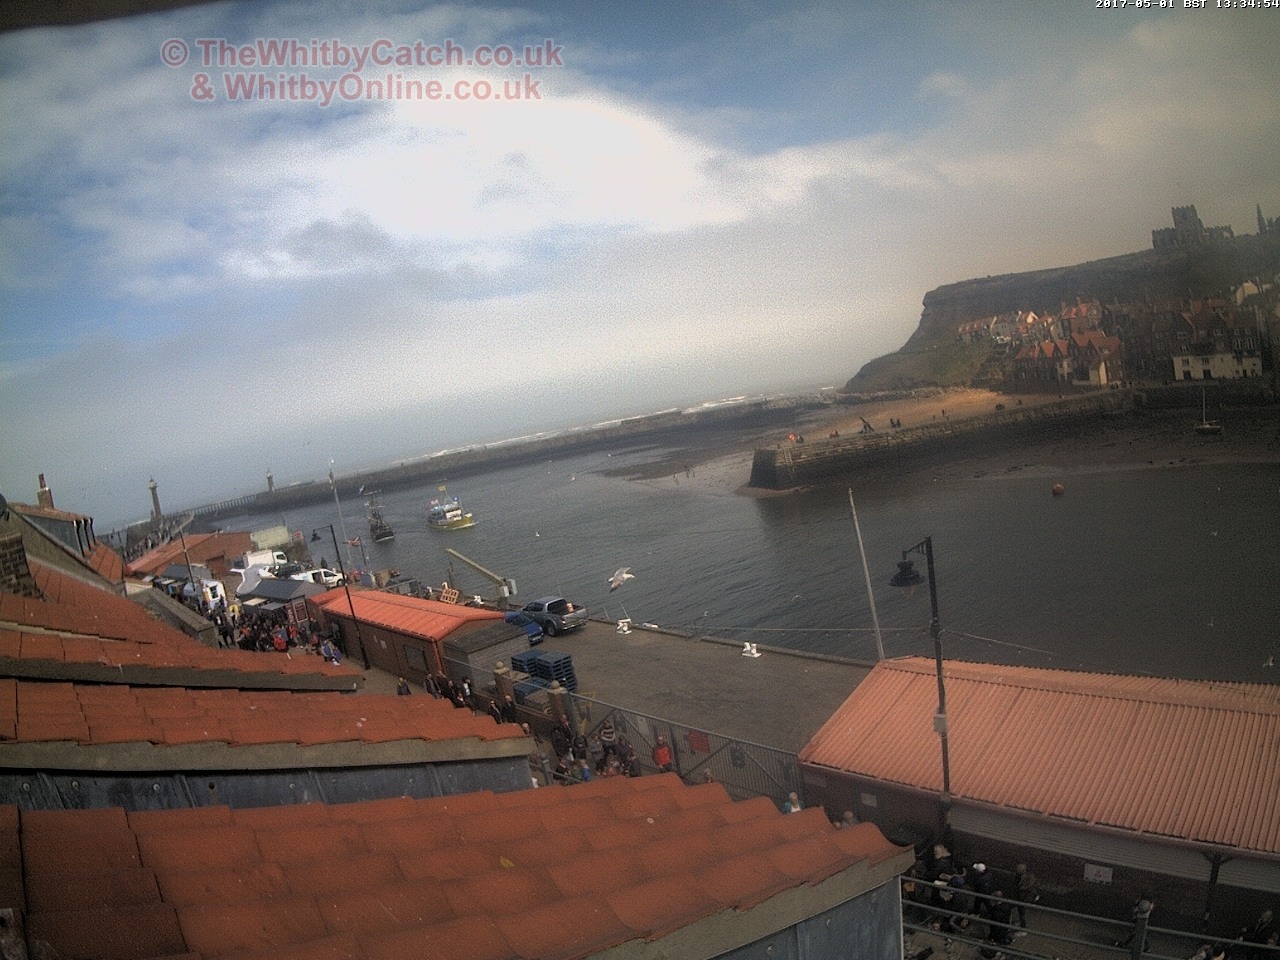 Whitby Mon 1st May 2017 13:35.